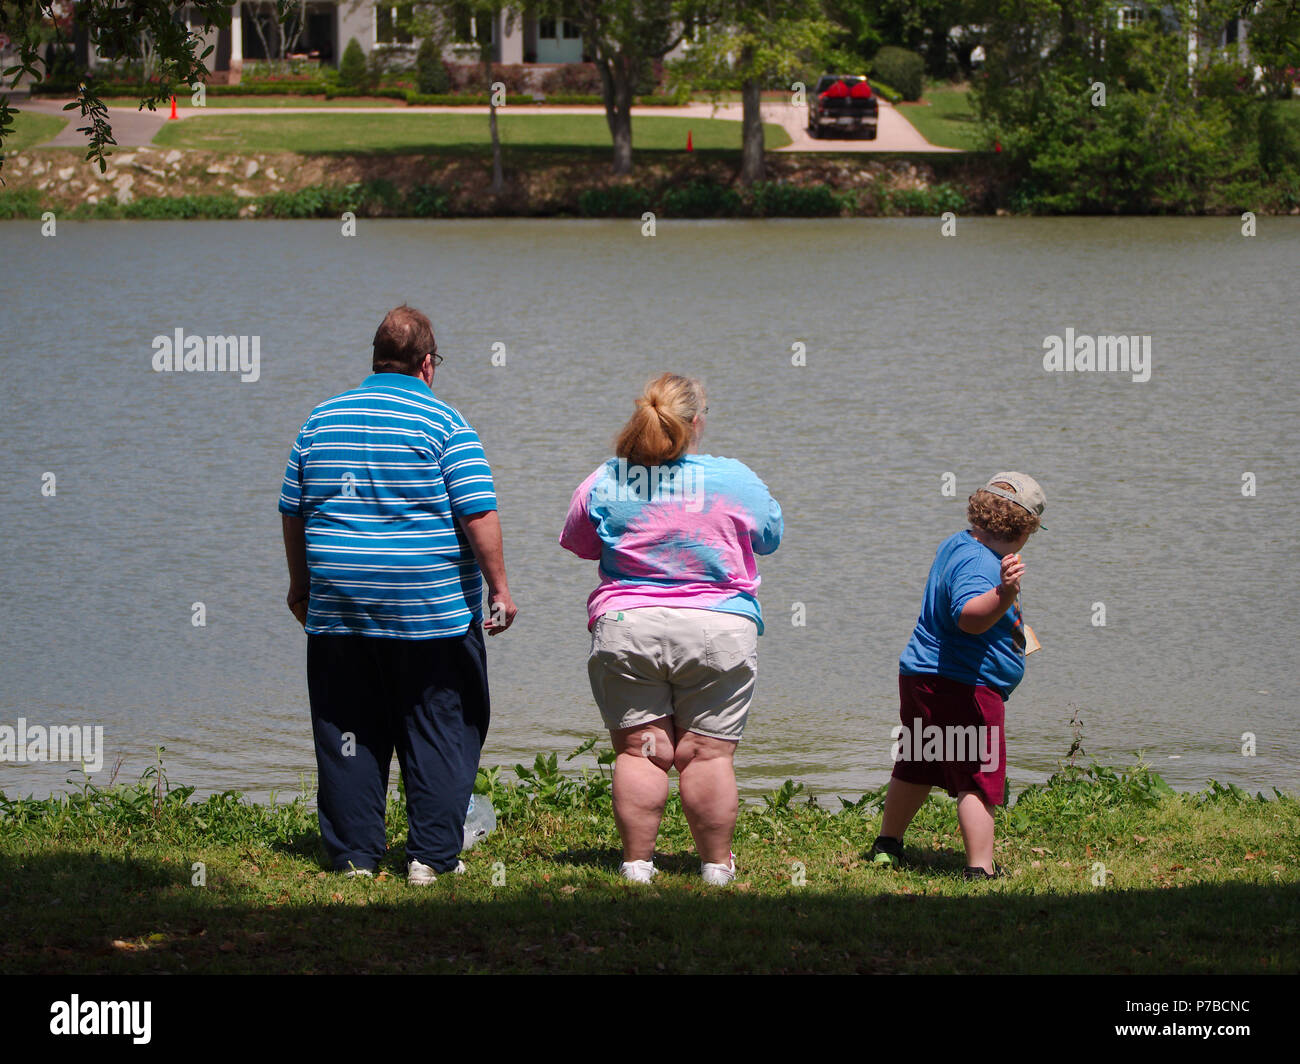 Baton Rouge, Louisiana, USA - 2018: Mother, father and child spending time in a park on a Sunday afternoon. Stock Photo